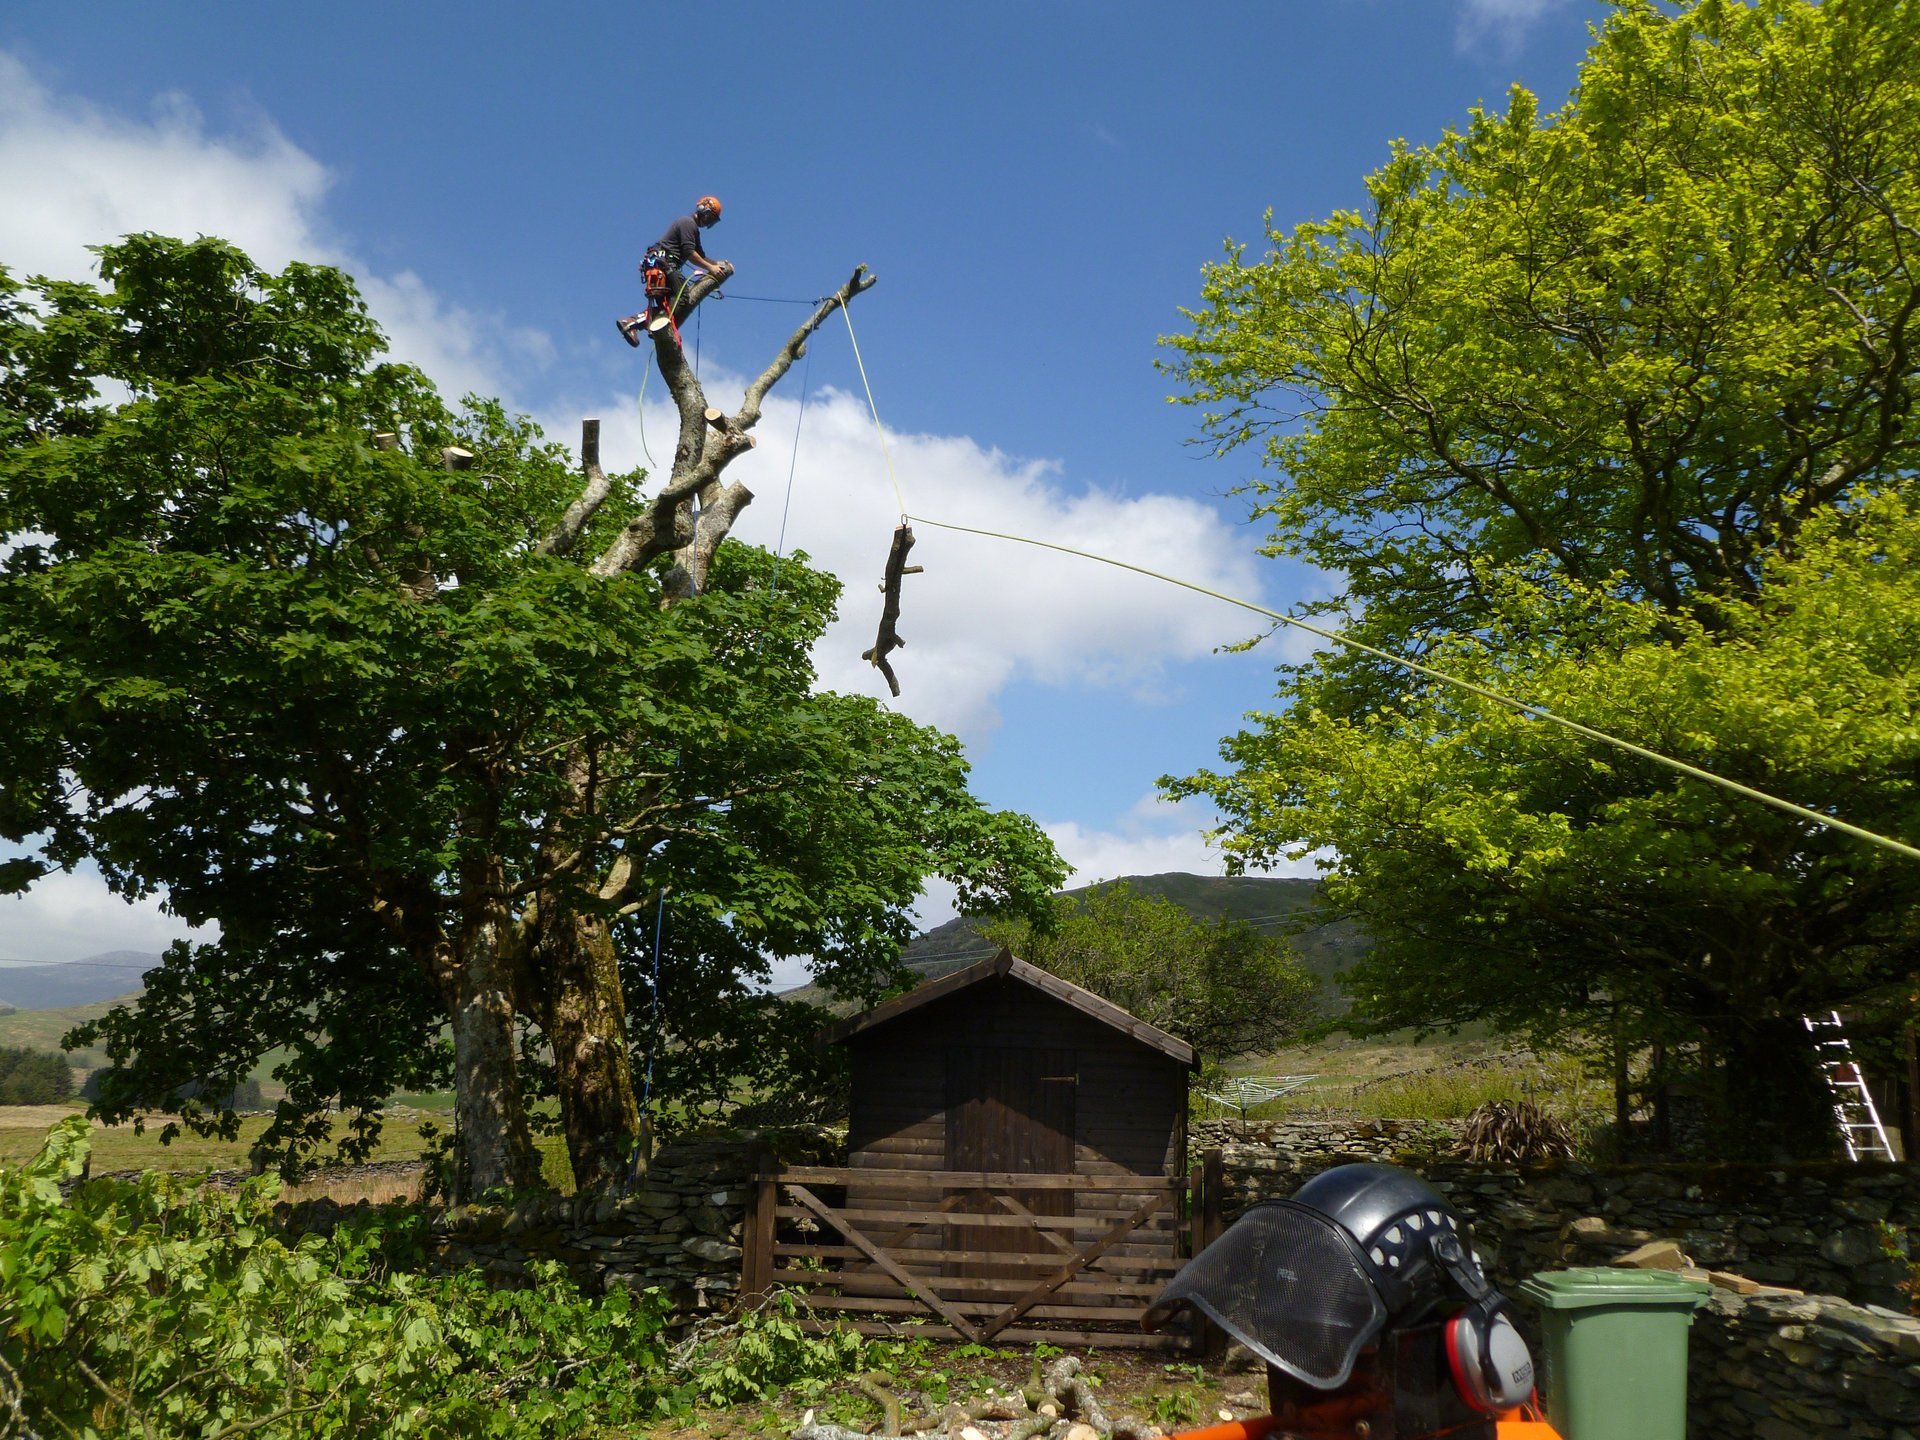 A lovely sunny North Wales day for tree surgery.